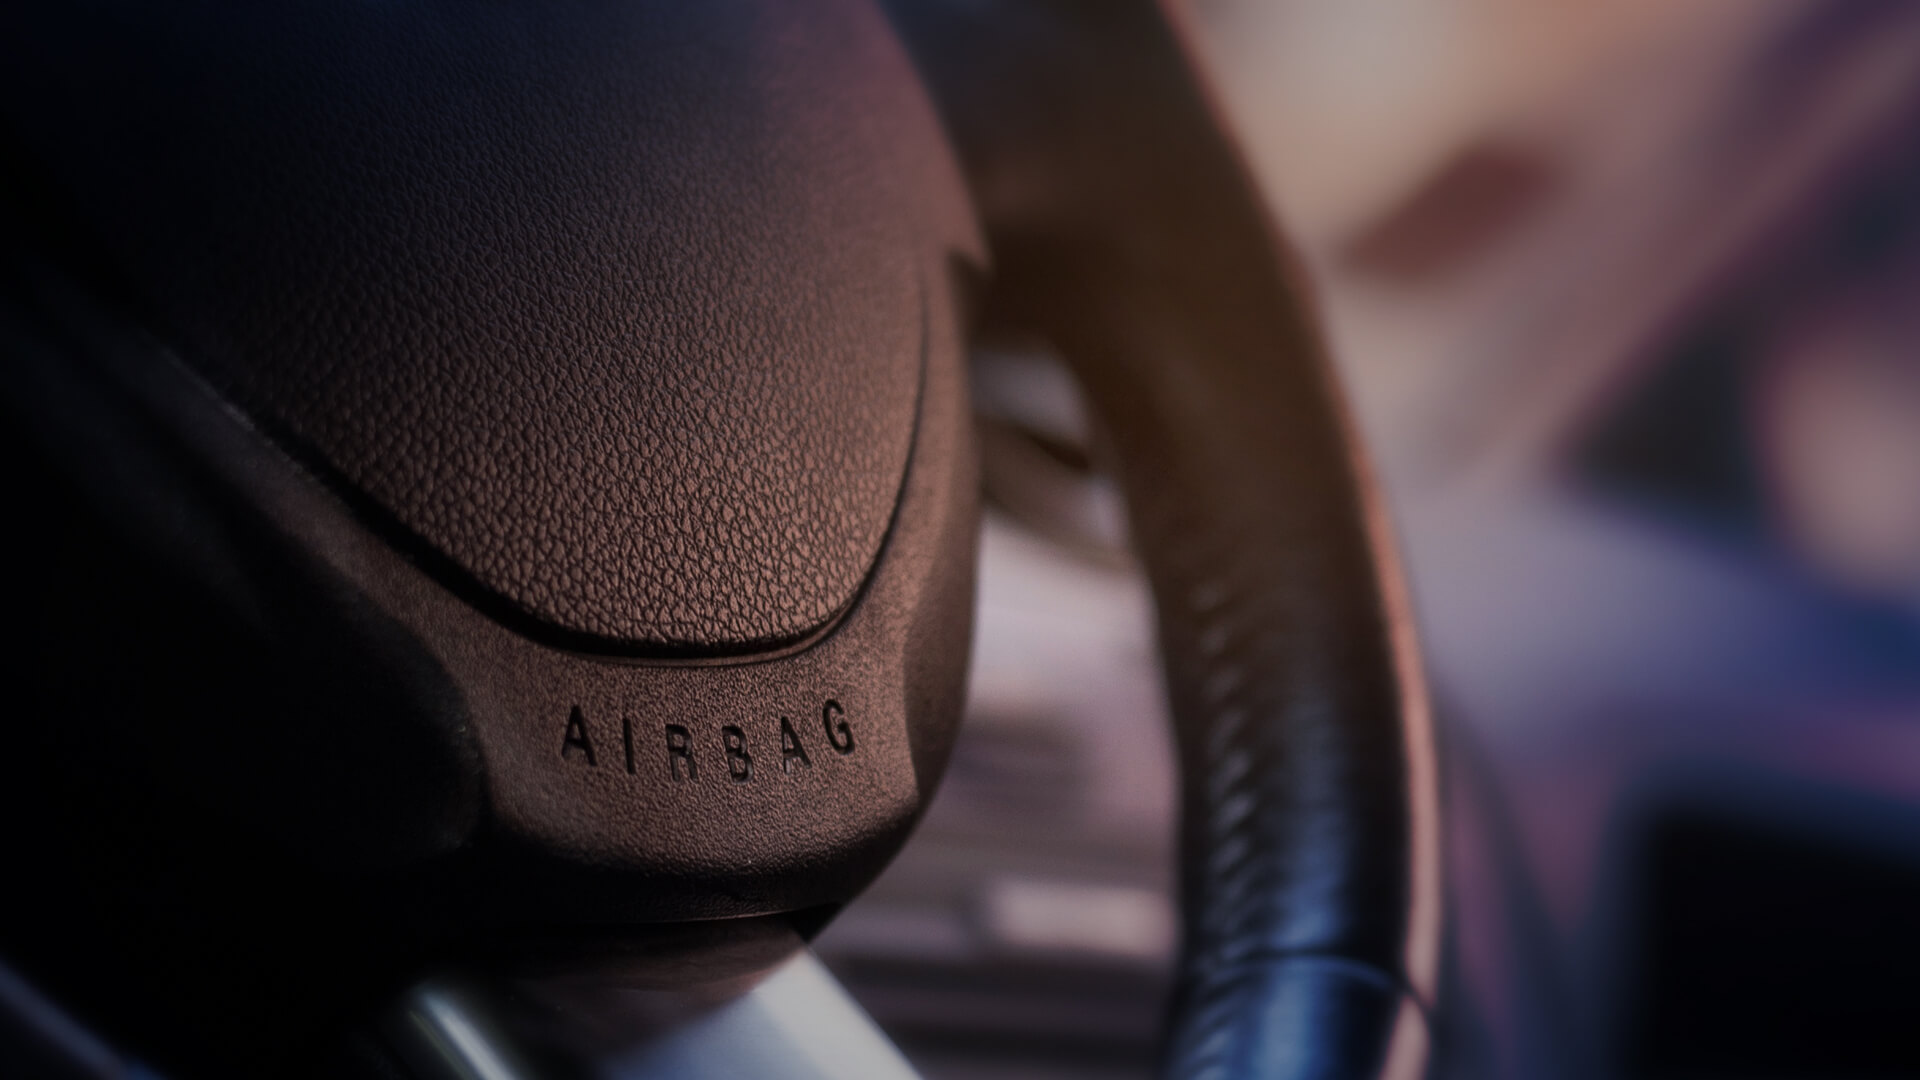 Defective airbag within steering wheel